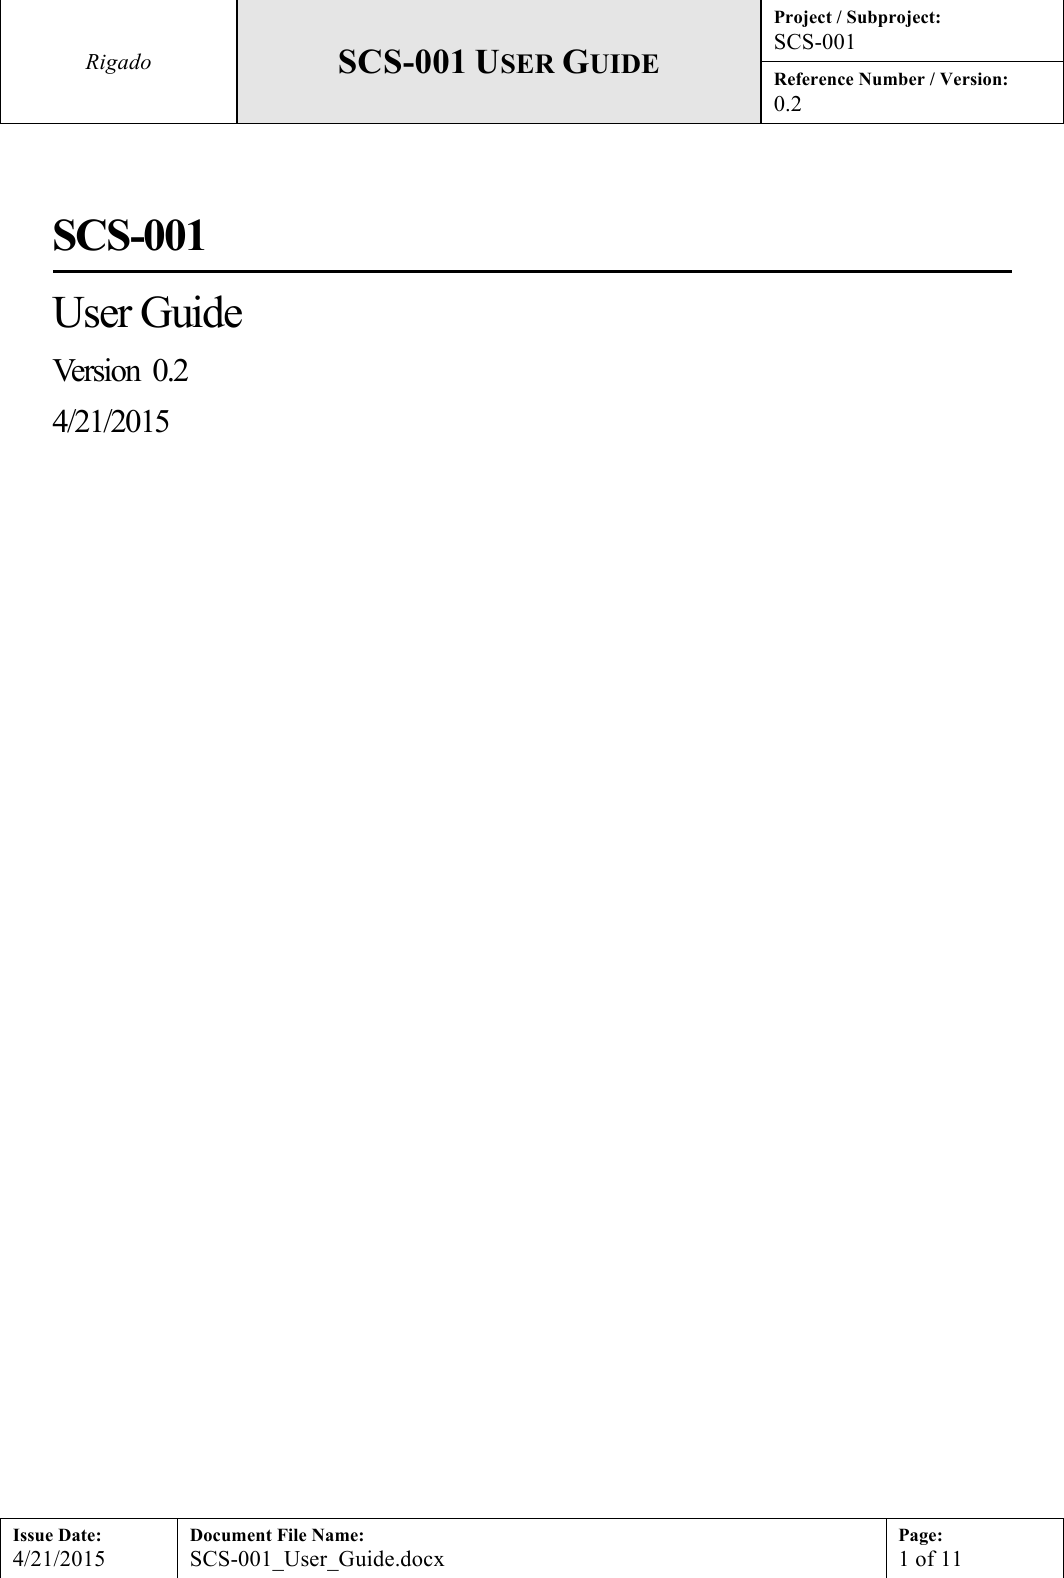 Rigado SCS-001 USER GUIDE Project / Subproject: SCS-001 Reference Number / Version: 0.2  Issue Date: 4/21/2015 Document File Name: SCS-001_User_Guide.docx Page: 1 of 11     SCS-001 User Guide Ve r s i o n    0.2 4/21/2015       